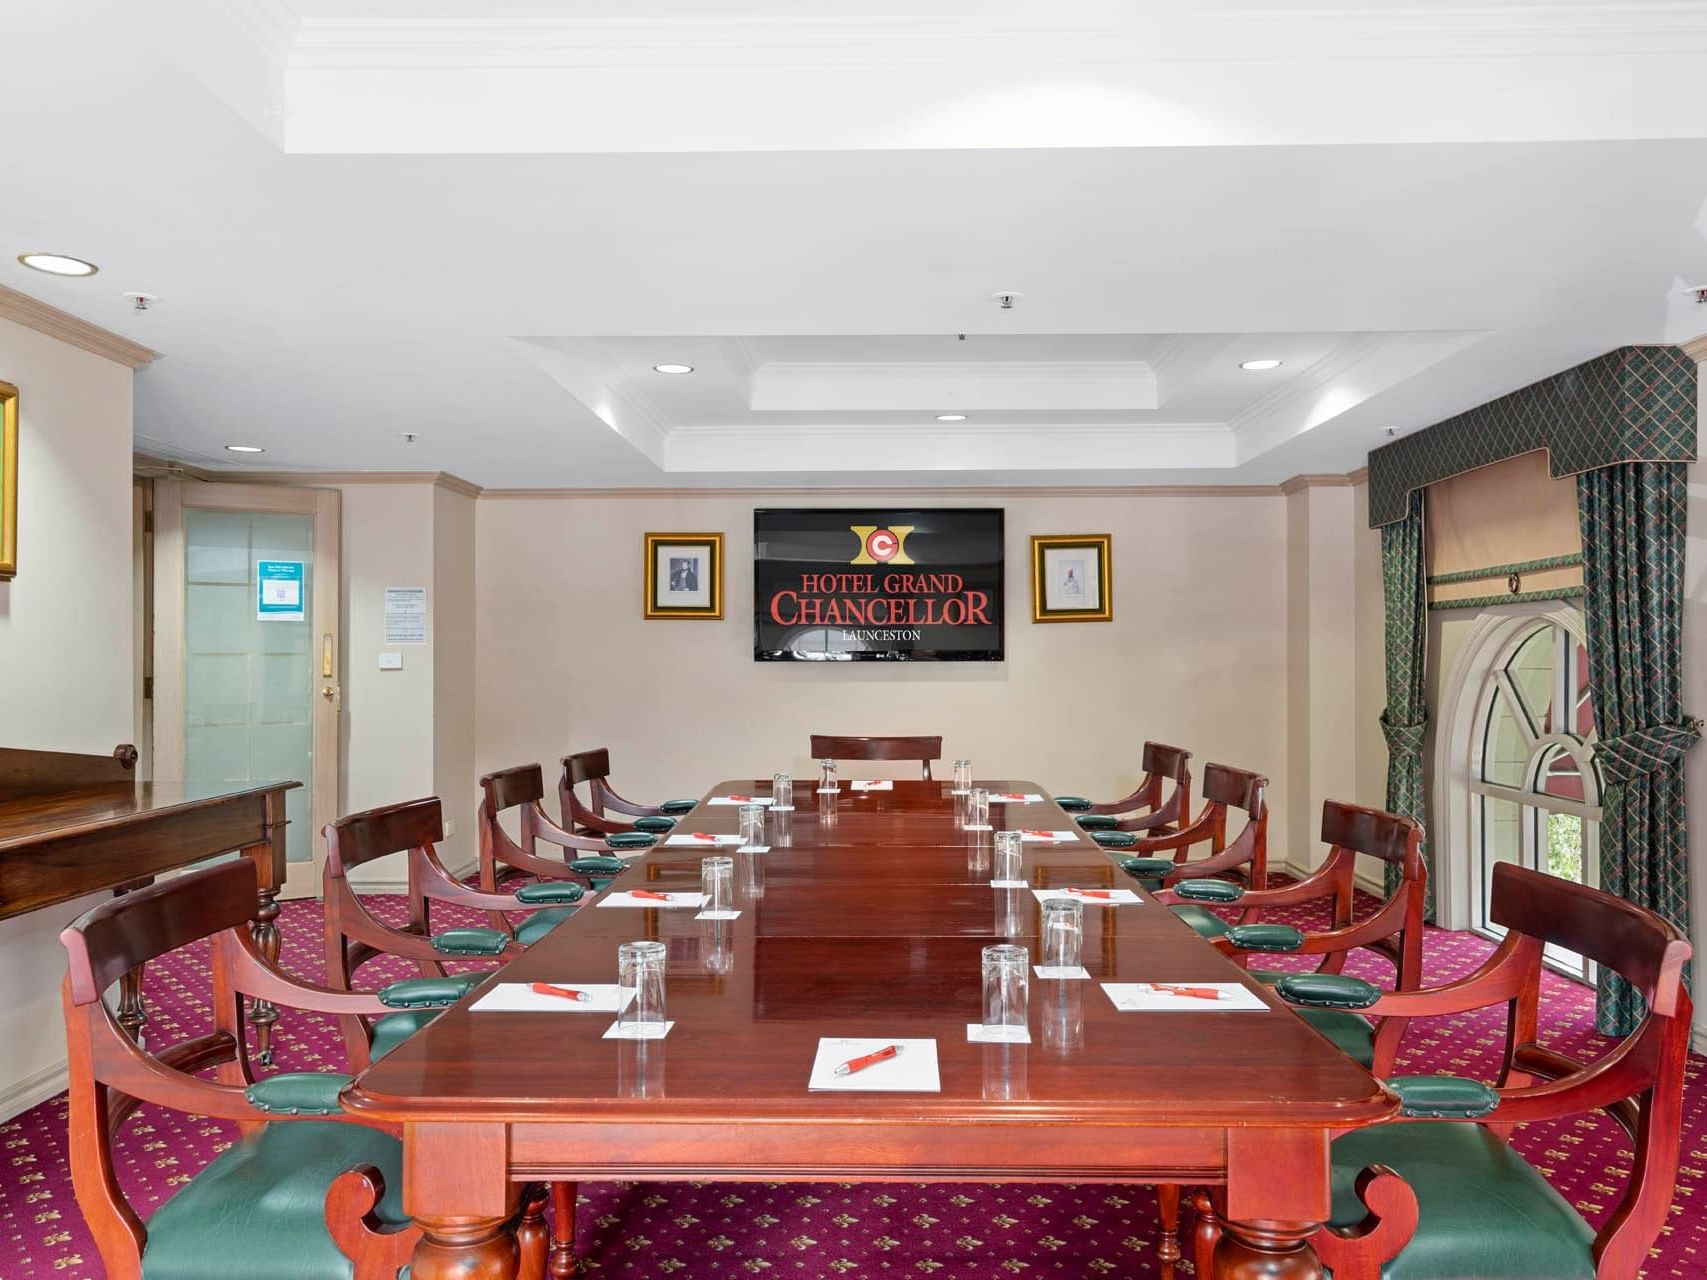 Conference set-up on the red matted floor in Chancellor 7 at Hotel Grand Chancellor Launceston